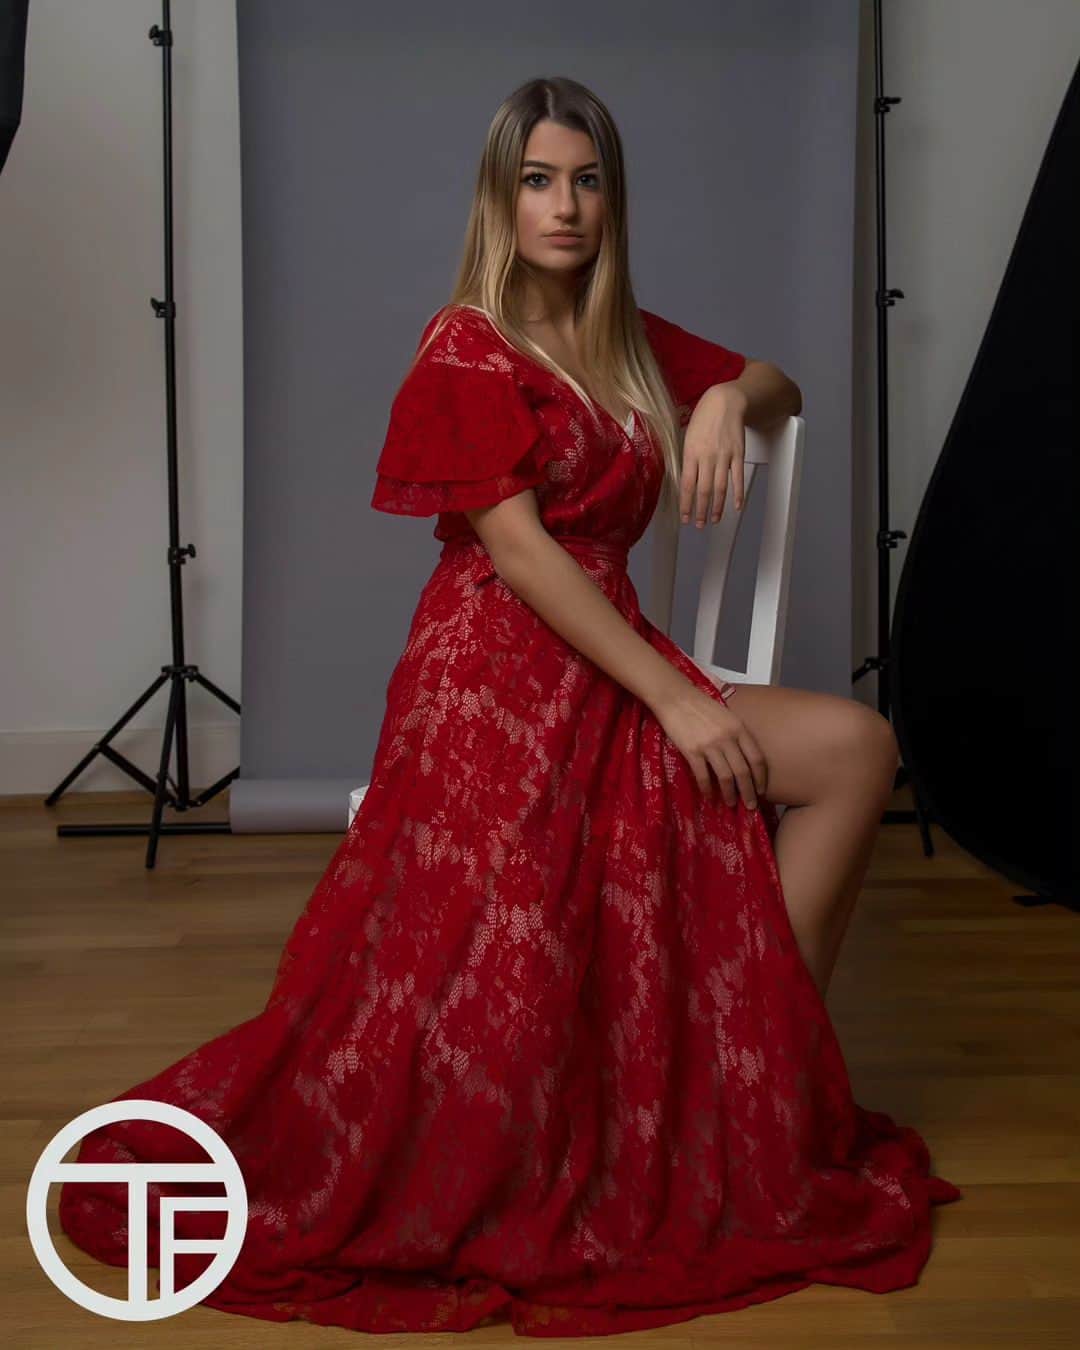 Timo the Fotographerのインスタグラム：「@vanessasljivic graced us in our small studio in Germany, wearing a captivating red dress, creating a timeless piece. ❤️📸 #ModelMuse #StudioVibes #RedHot #FashionPassion #VanessaSljiviic #FrazierFotography #RedDress #ModelBeauty #StudioShoot #Fashionista #PhotographyPassion #VanessaSljiviic #写真 #モデル」